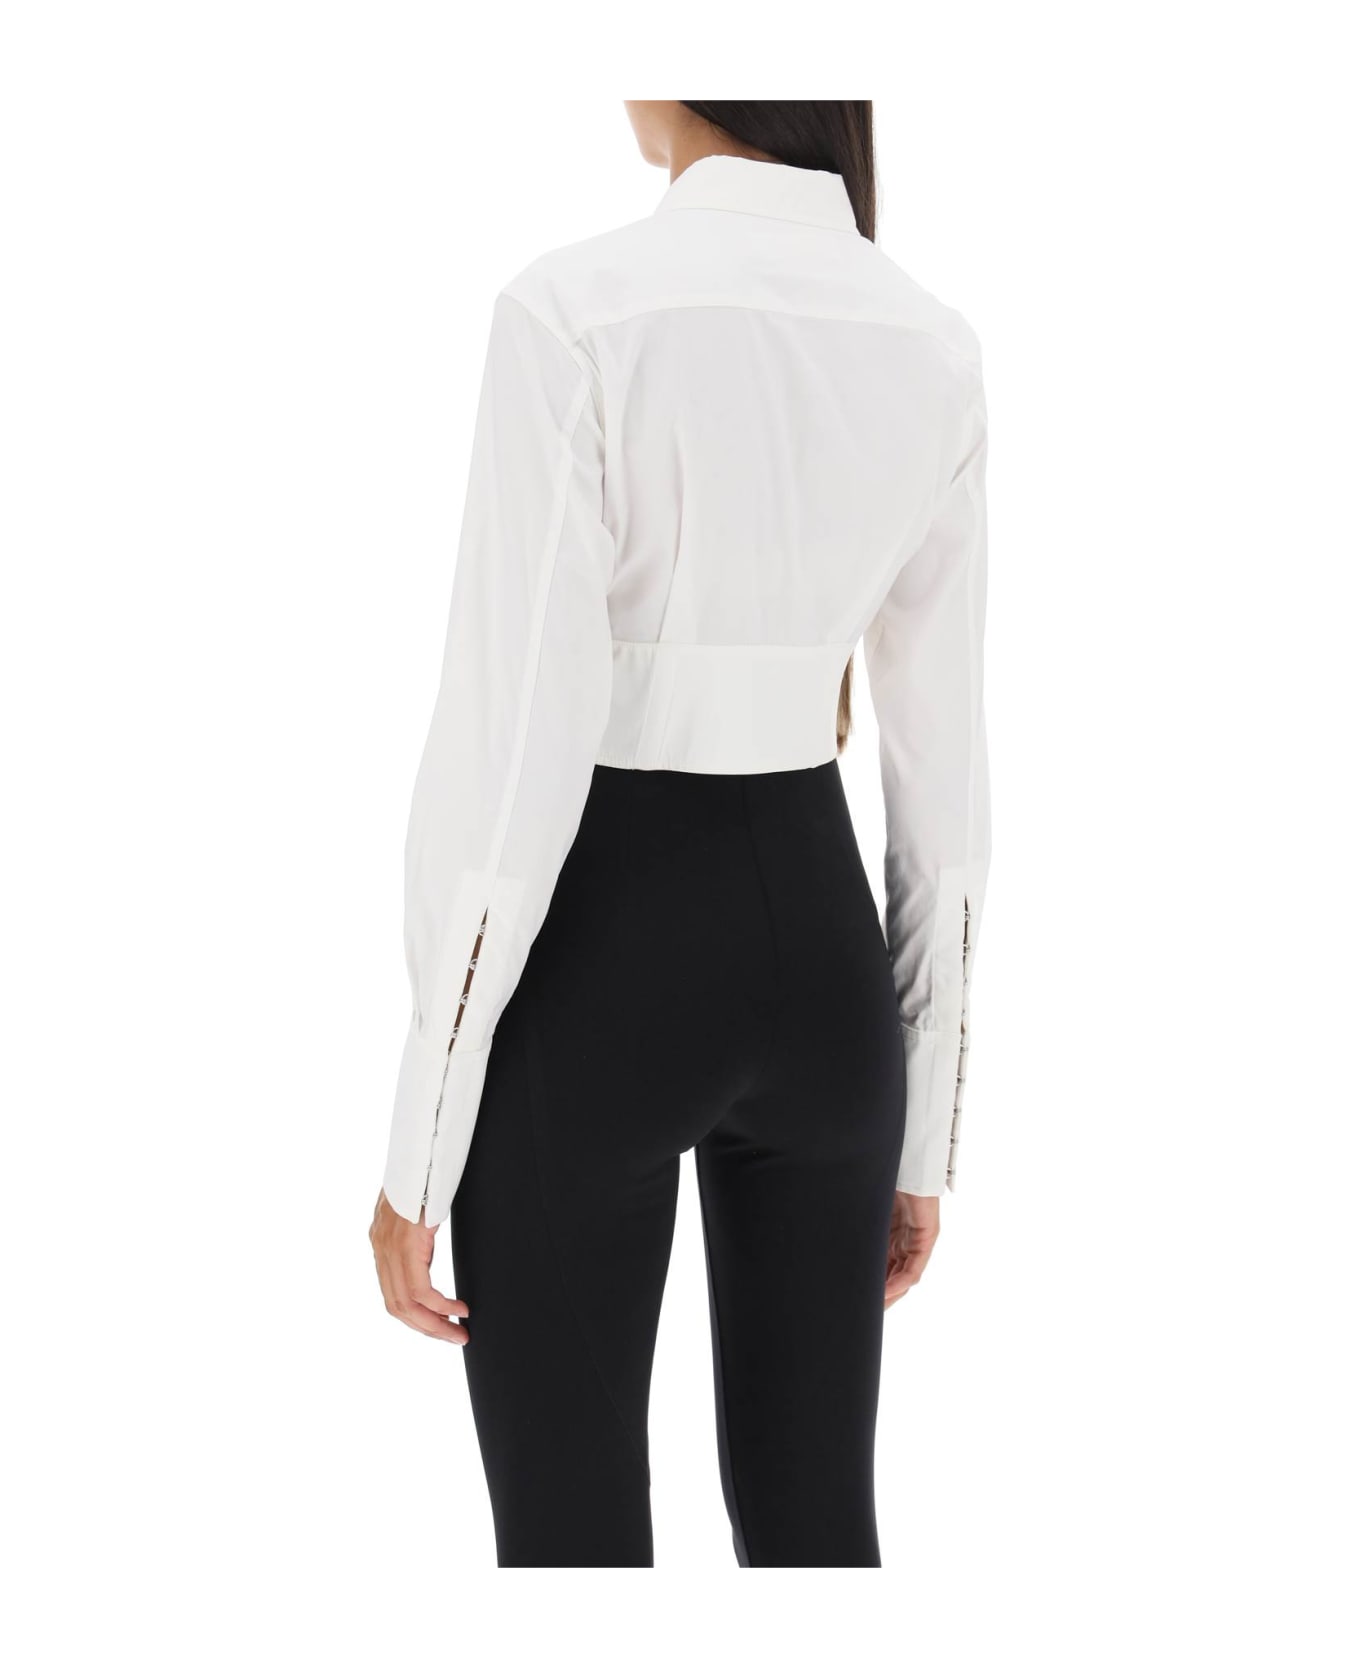 Dion Lee Cropped Shirt With Underbust Corset - IVORY (White) ブラウス